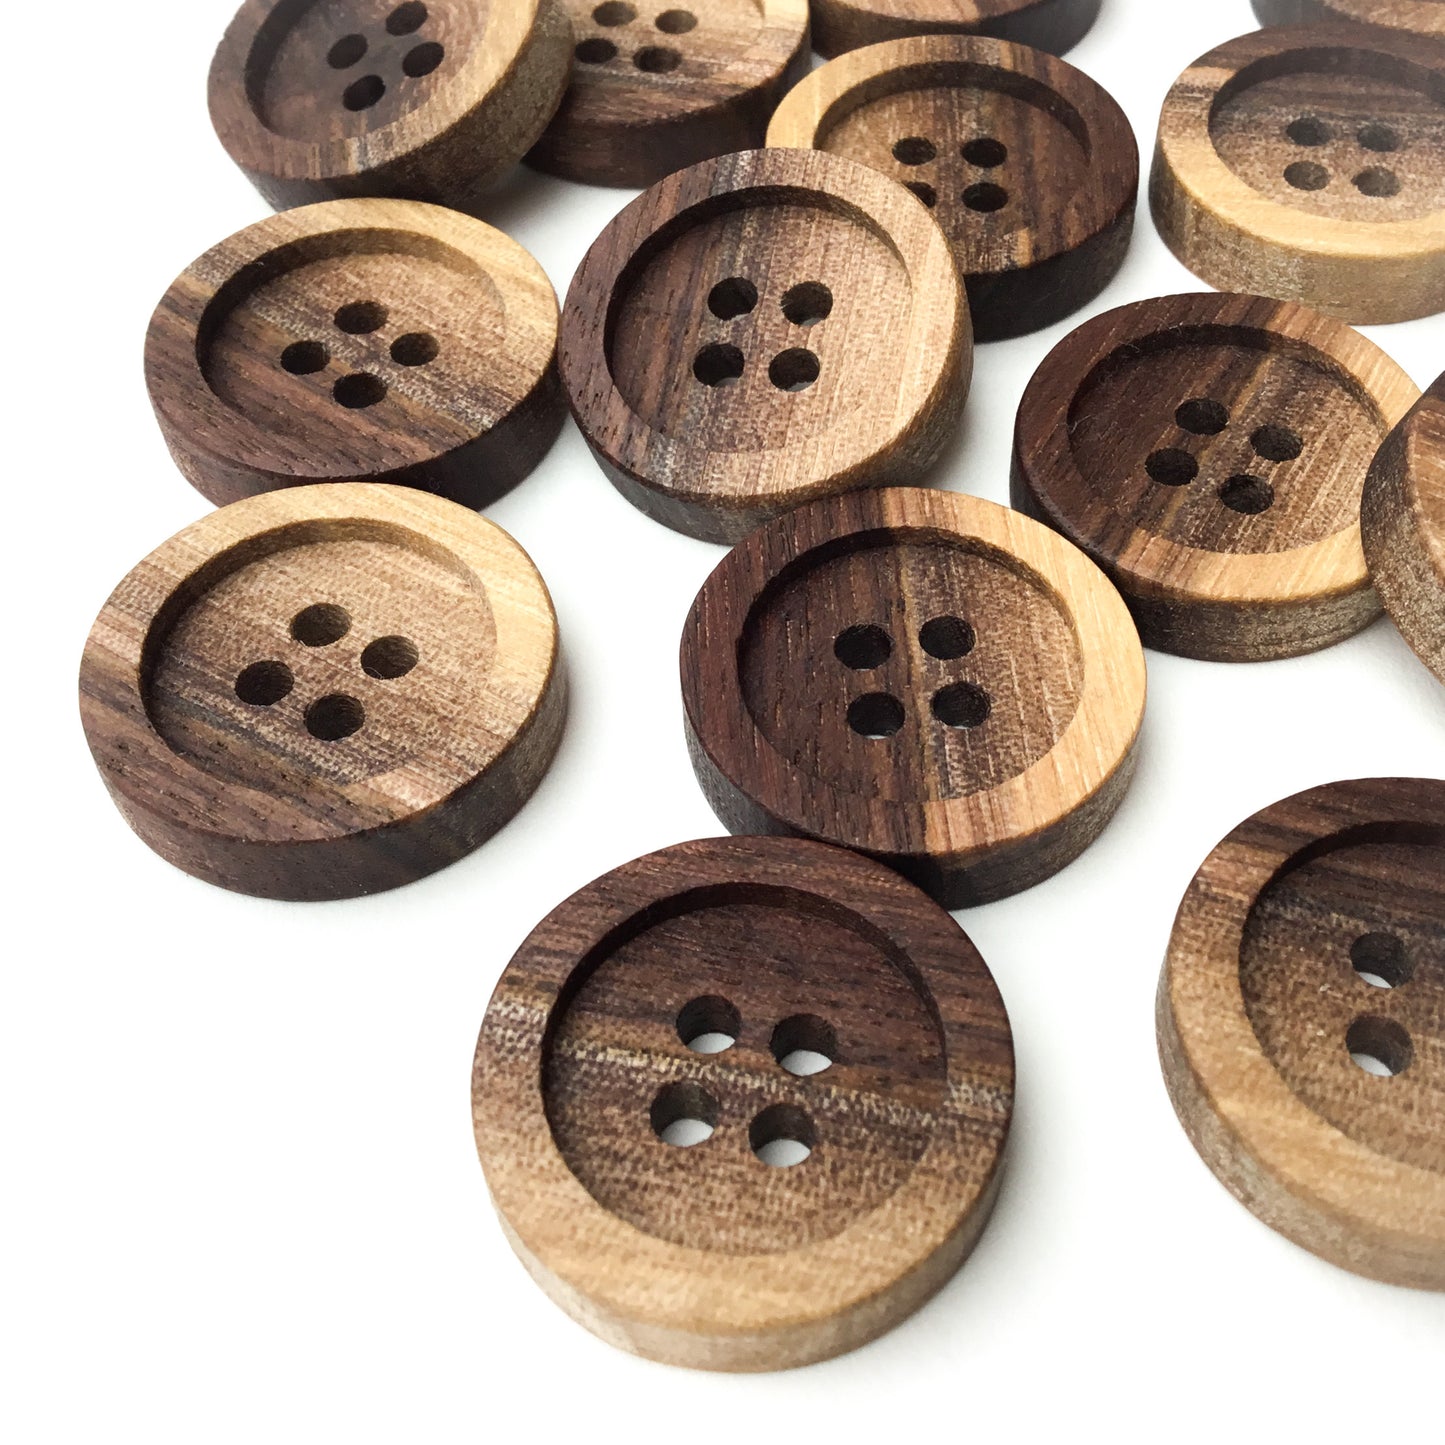 Four Hole Inset Button - Two-toned Black Walnut Wood  1"